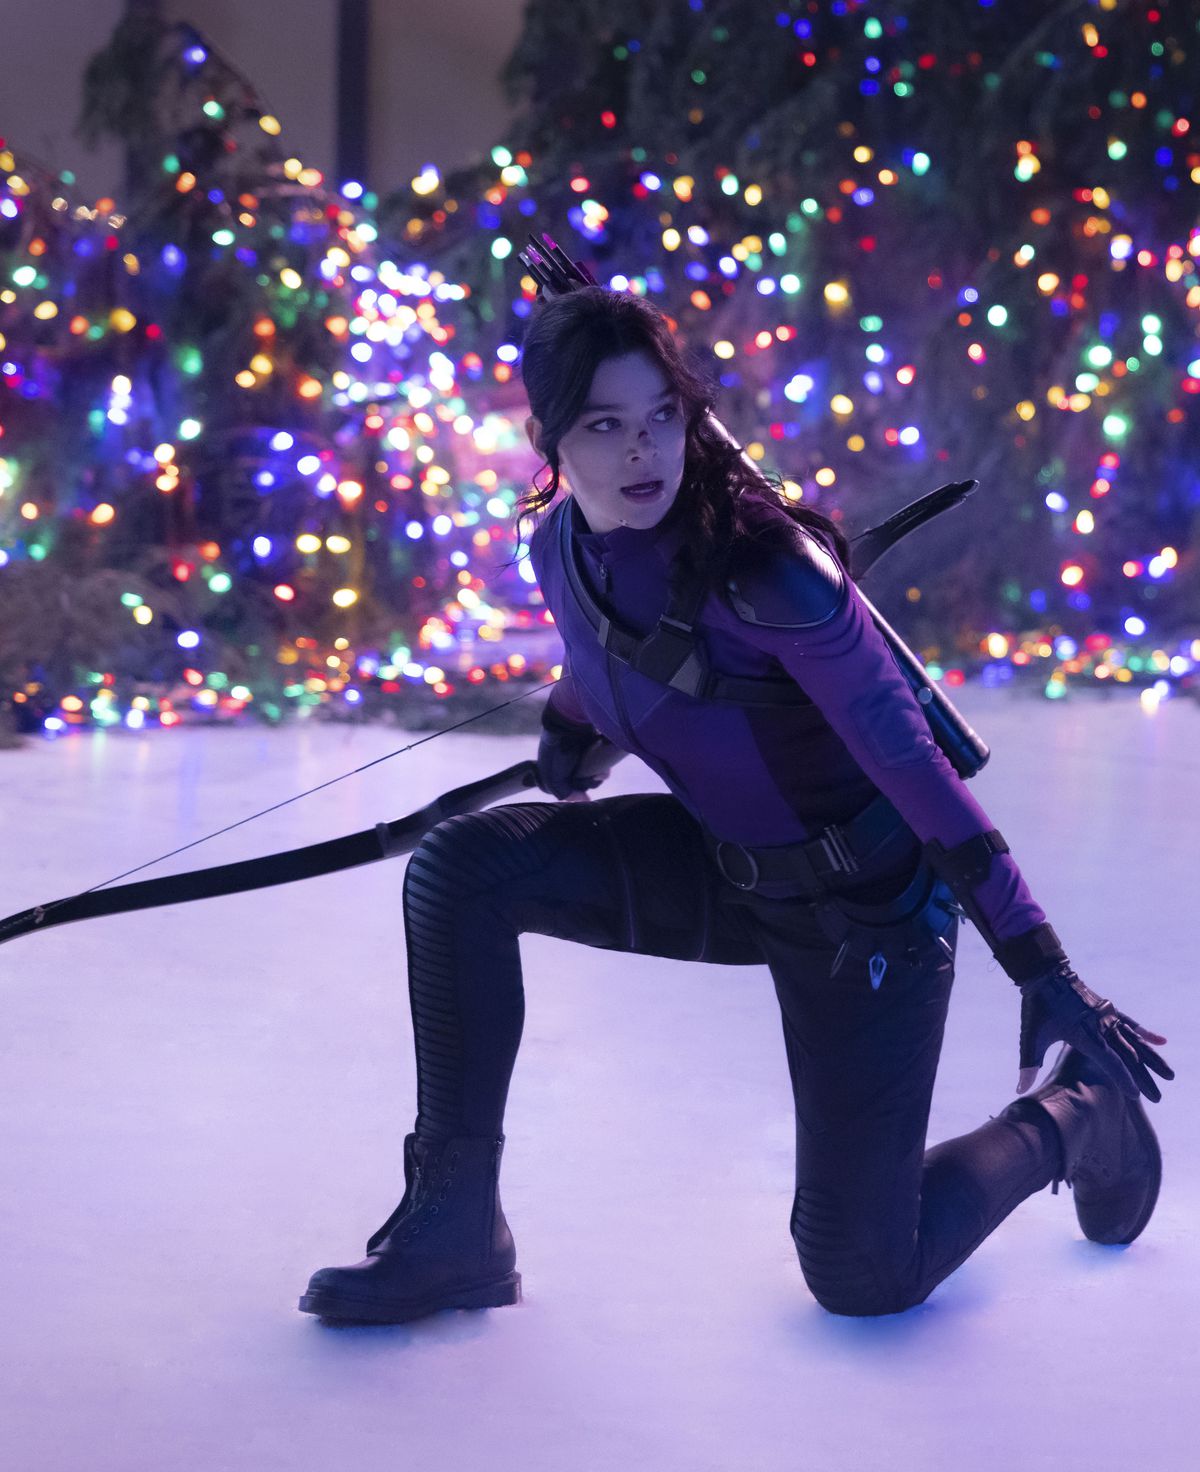 Kate Bishop (Hailee Steinfeld) in her purple uniform kneels on the ice of an ice skating rink while holding her bow, while christmas lights illuminate her from behind